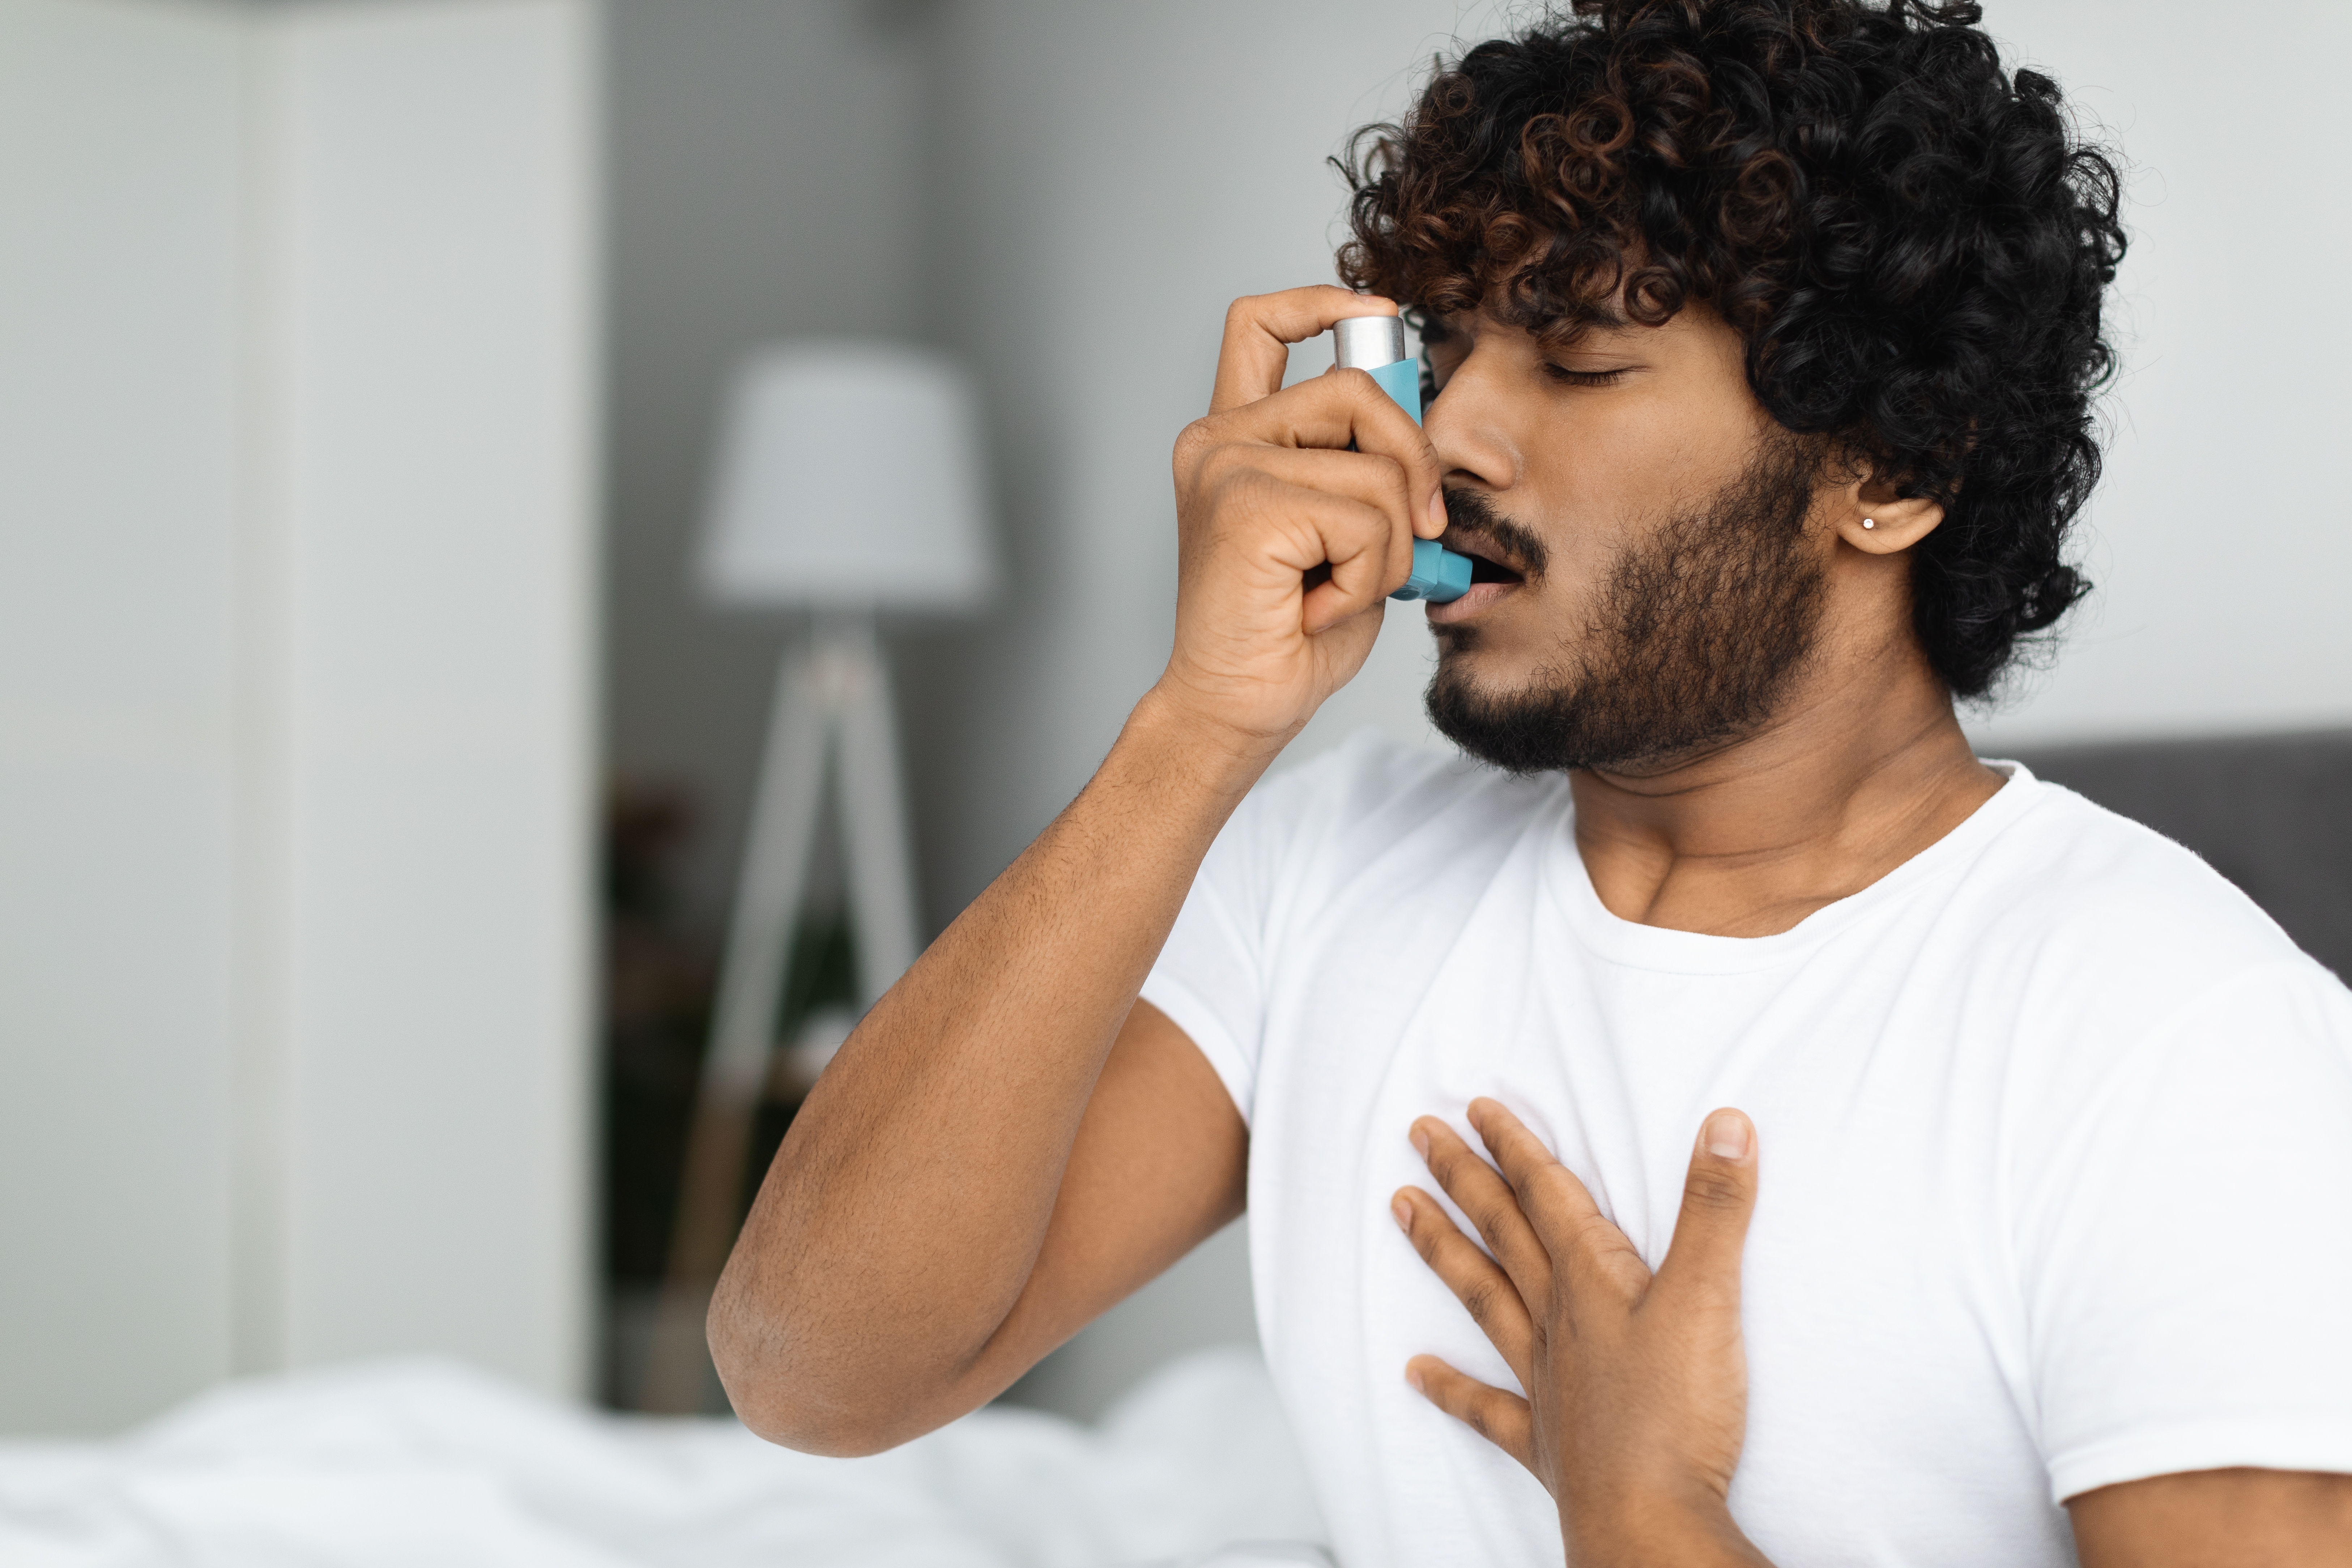 A man suffering from an asthma attack. | Source: Shutterstock